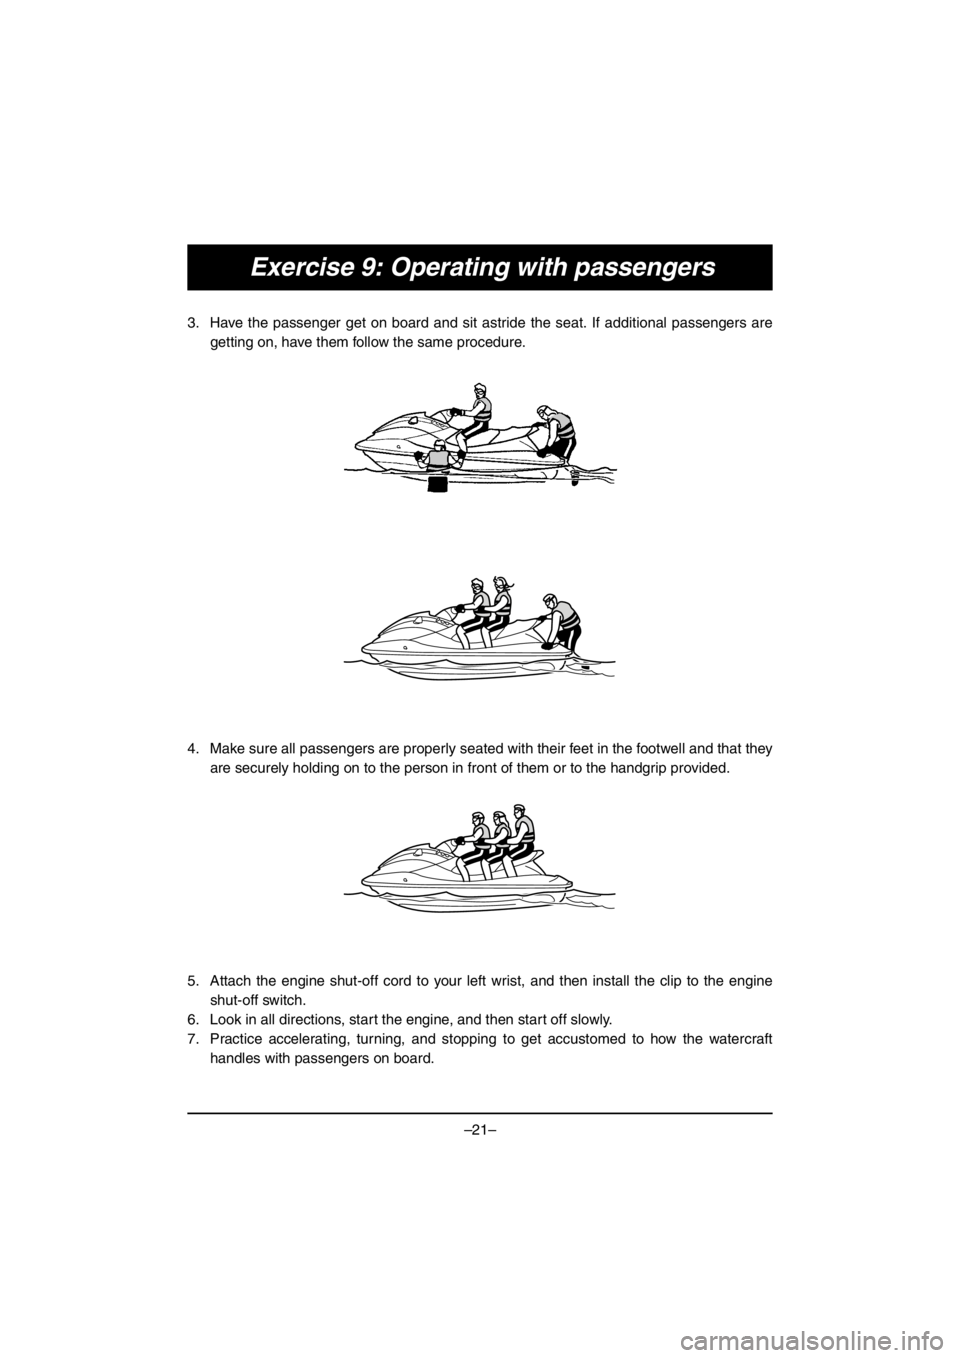 YAMAHA V1 SPORT 2016  Owners Manual –21–
Exercise 9: Operating with passengers
3. Have the passenger get on board and sit astride the seat. If additional passengers are
getting on, have them follow the same procedure. 
4. Make sure 